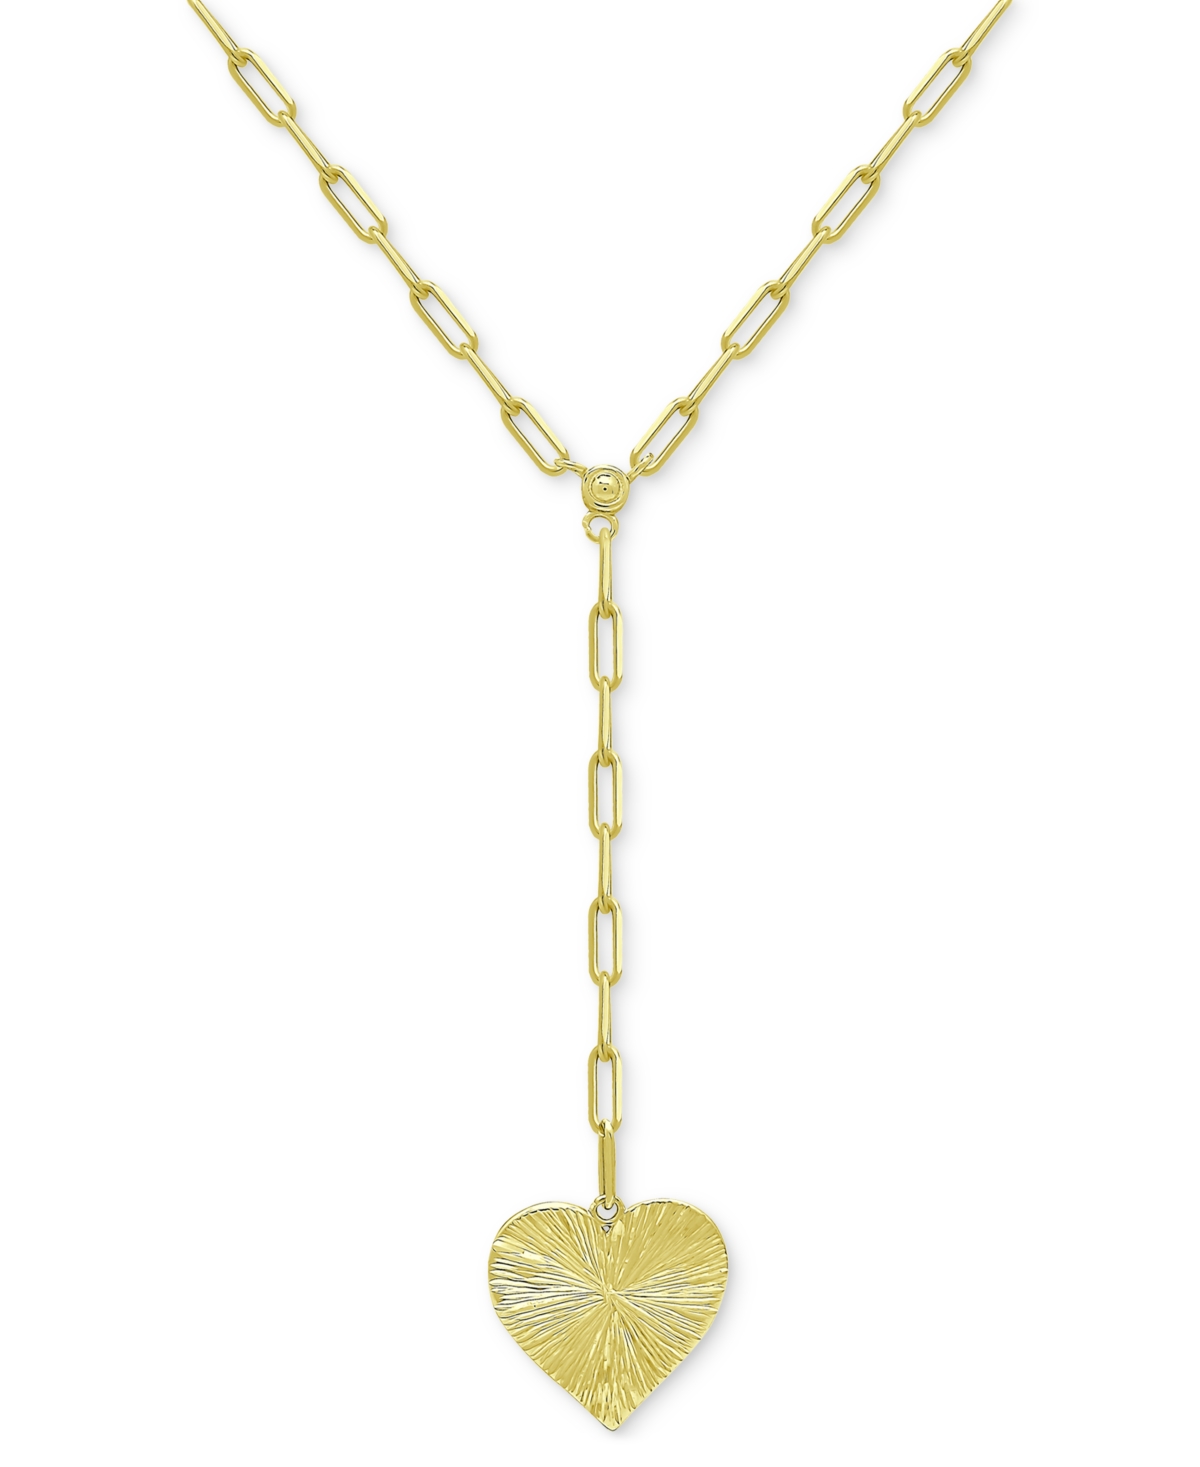 Giani Bernini Radiant Heart Lariat Necklace, 16" + 2" Extender, Created For Macy's In Gold Over Silver